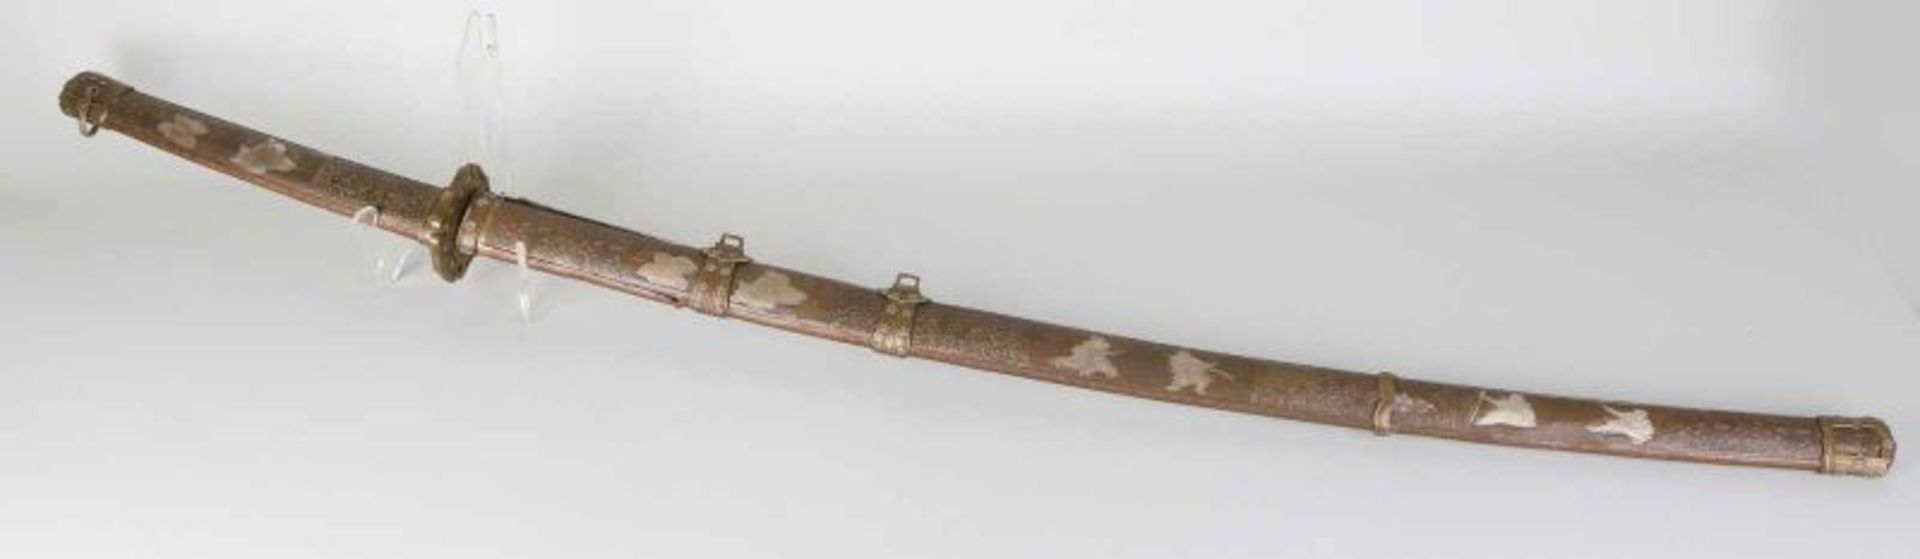 Antique Japanese Katana saber with copper sheath and handle. Worked and inlaid with white metal